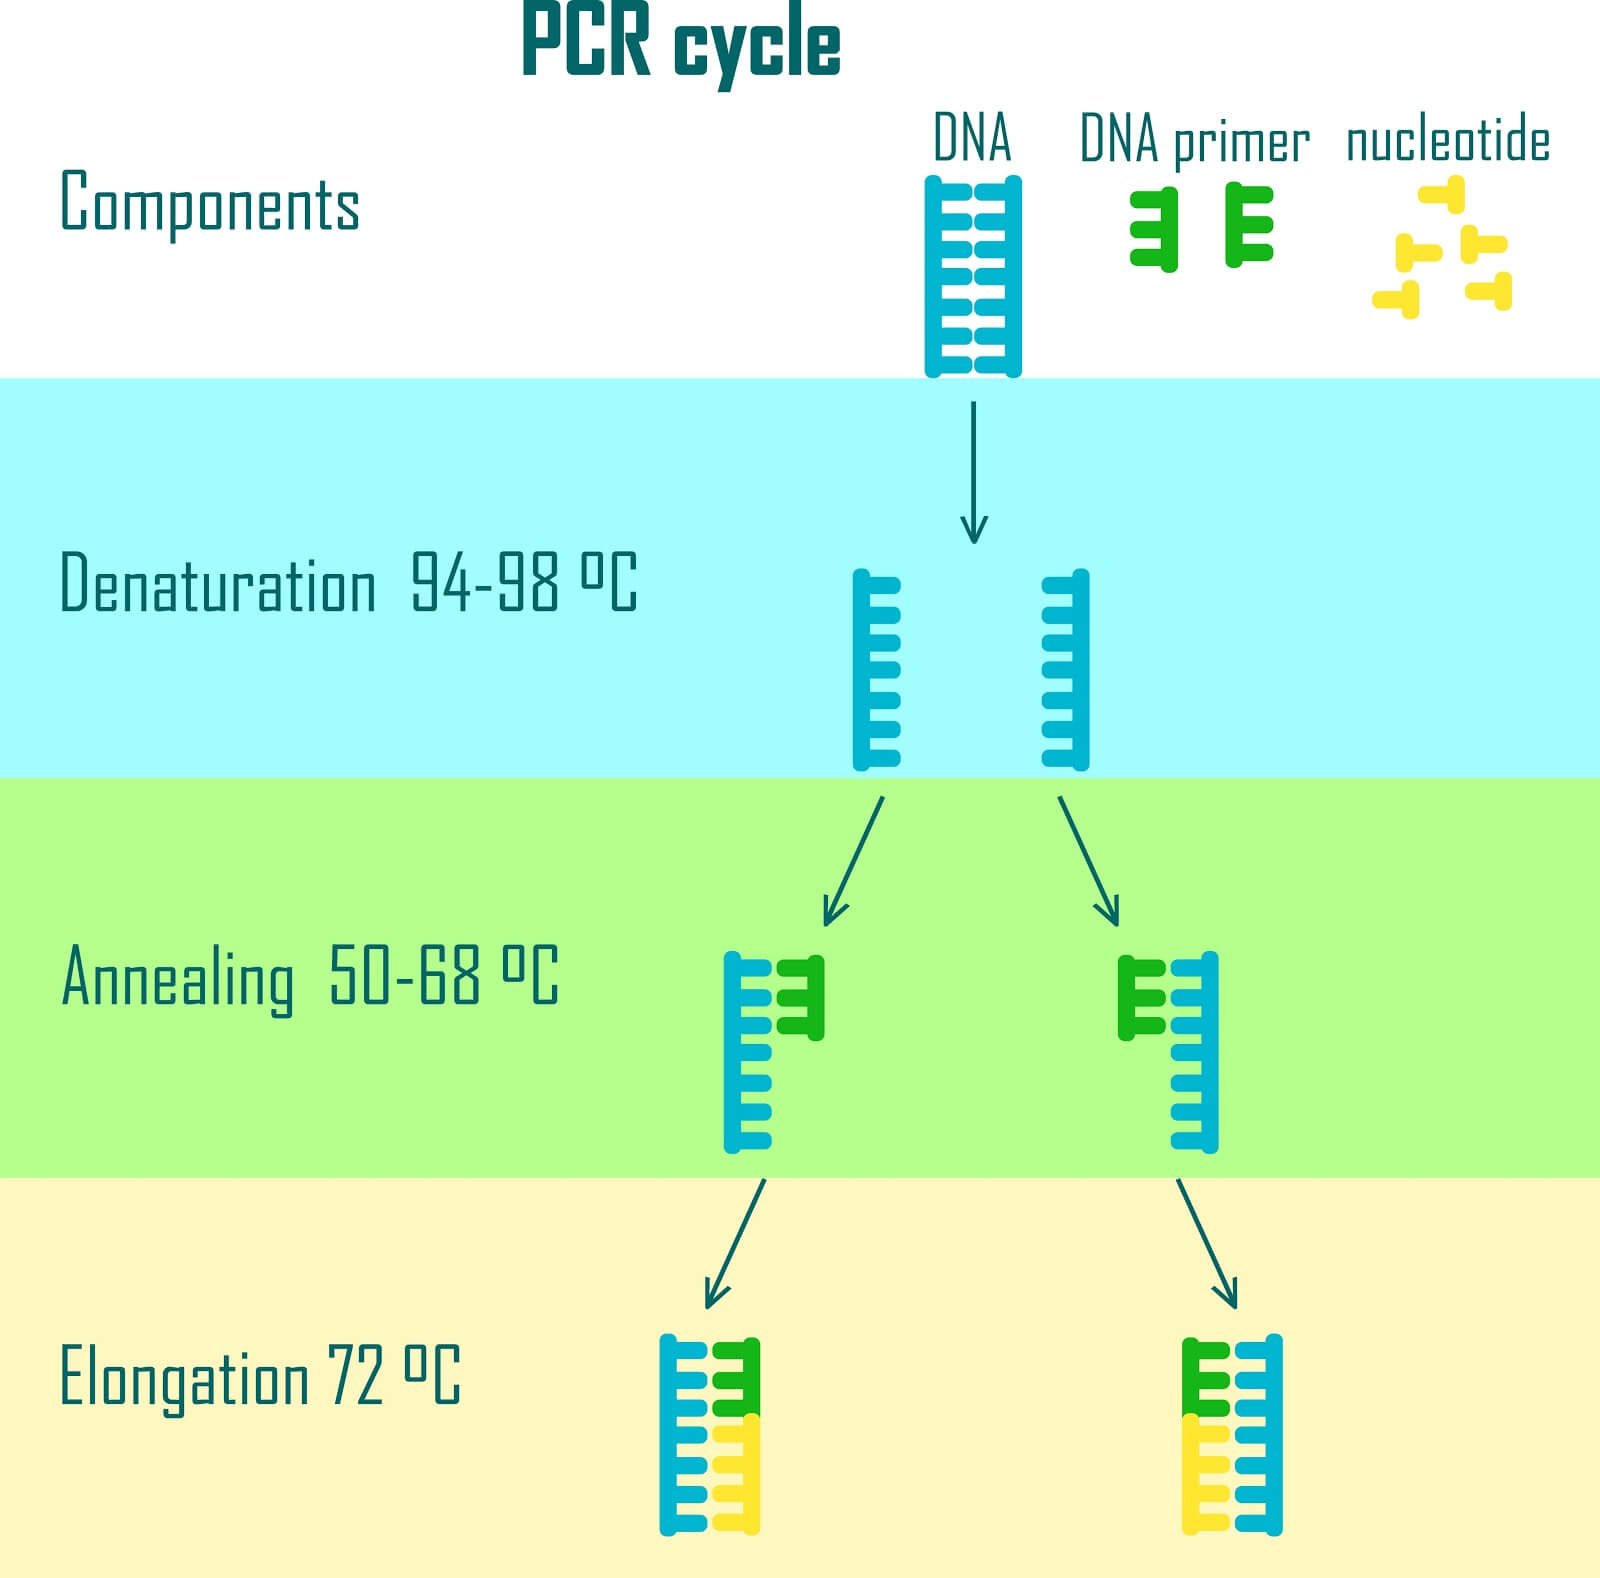 The polymerase chain reaction an is incredibly simple way of amplifying DNA. It is now being used to generate RAM-like data storage in DNA. ﻿